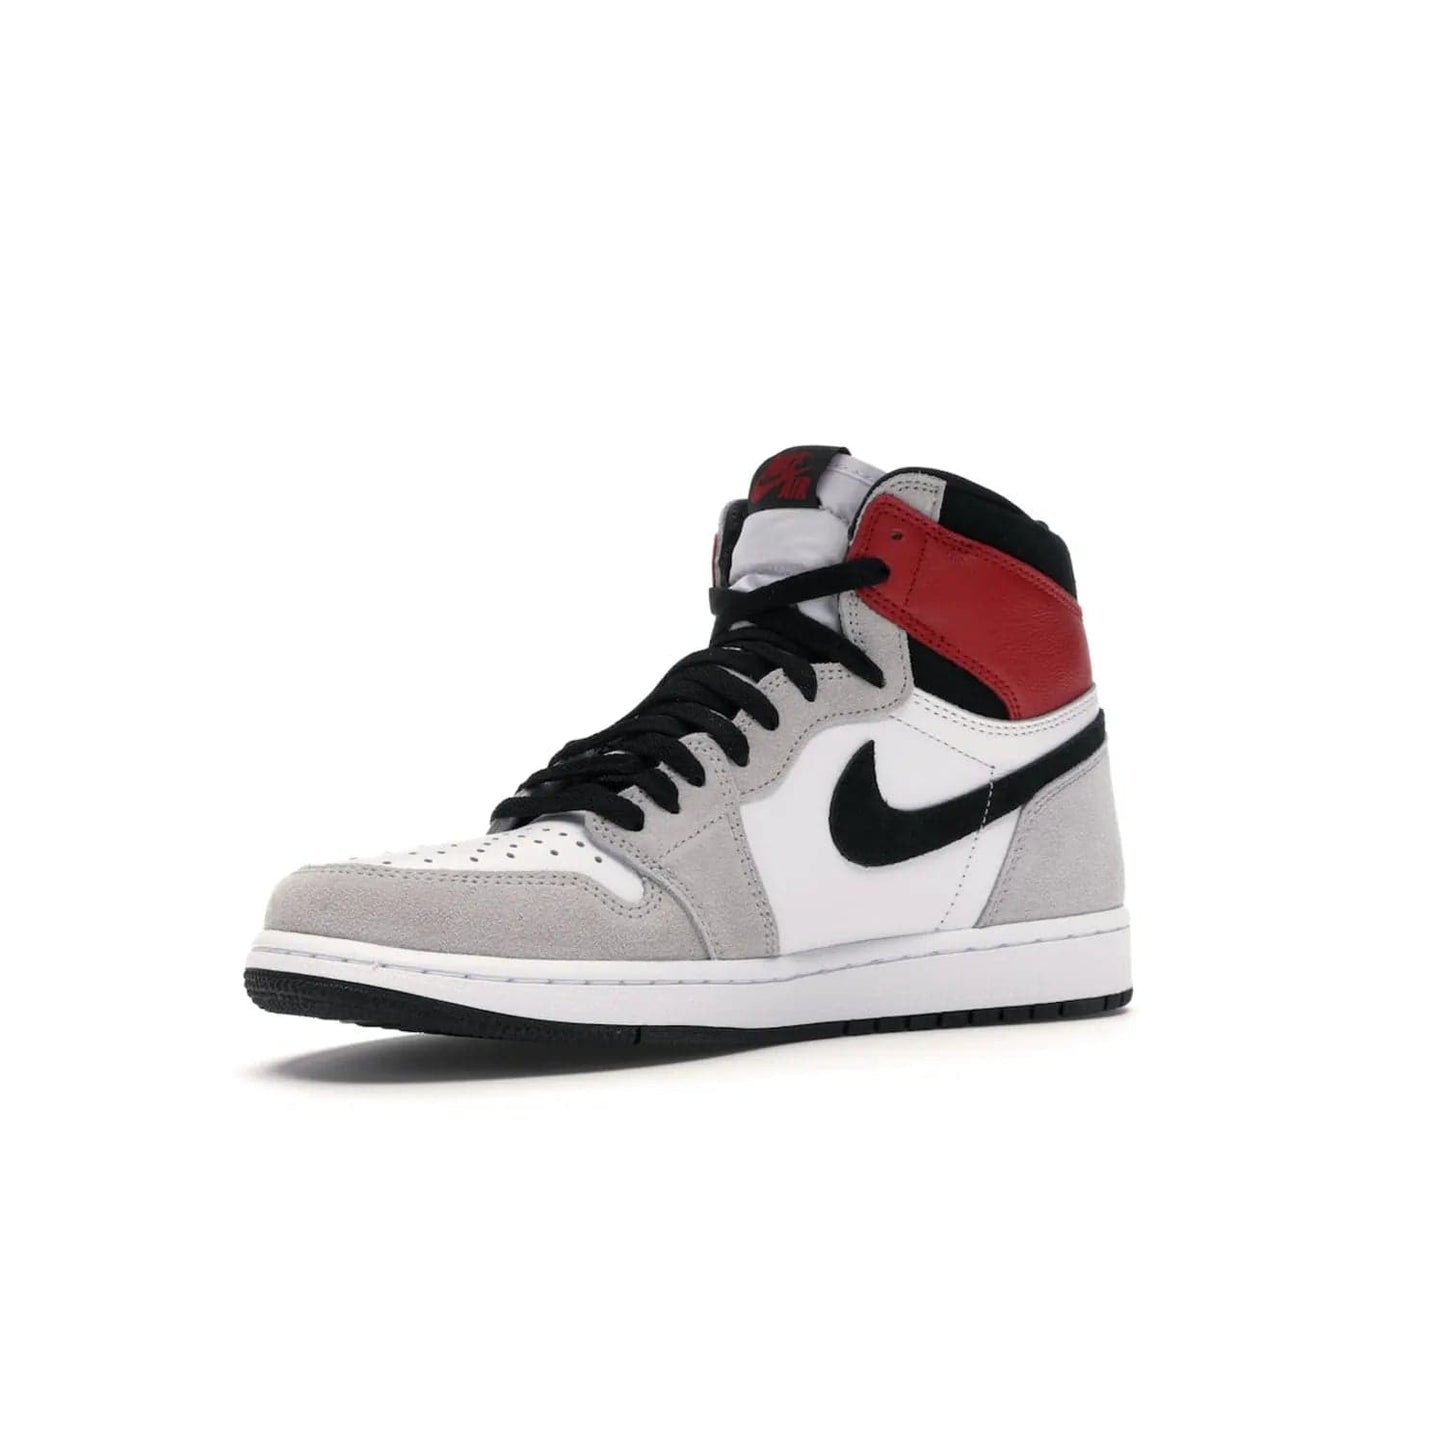 Jordan 1 Retro High Light Smoke Grey - Image 15 - Only at www.BallersClubKickz.com - Comfortable and stylish, Jordan 1 Retro High Light Smoke Grey offers a unique spin on a classic design. White leather, grey suede, red leather and black details are set on a white midsole and black outsole. Get the sneaker released in July 2020 and add a twist to your wardrobe.